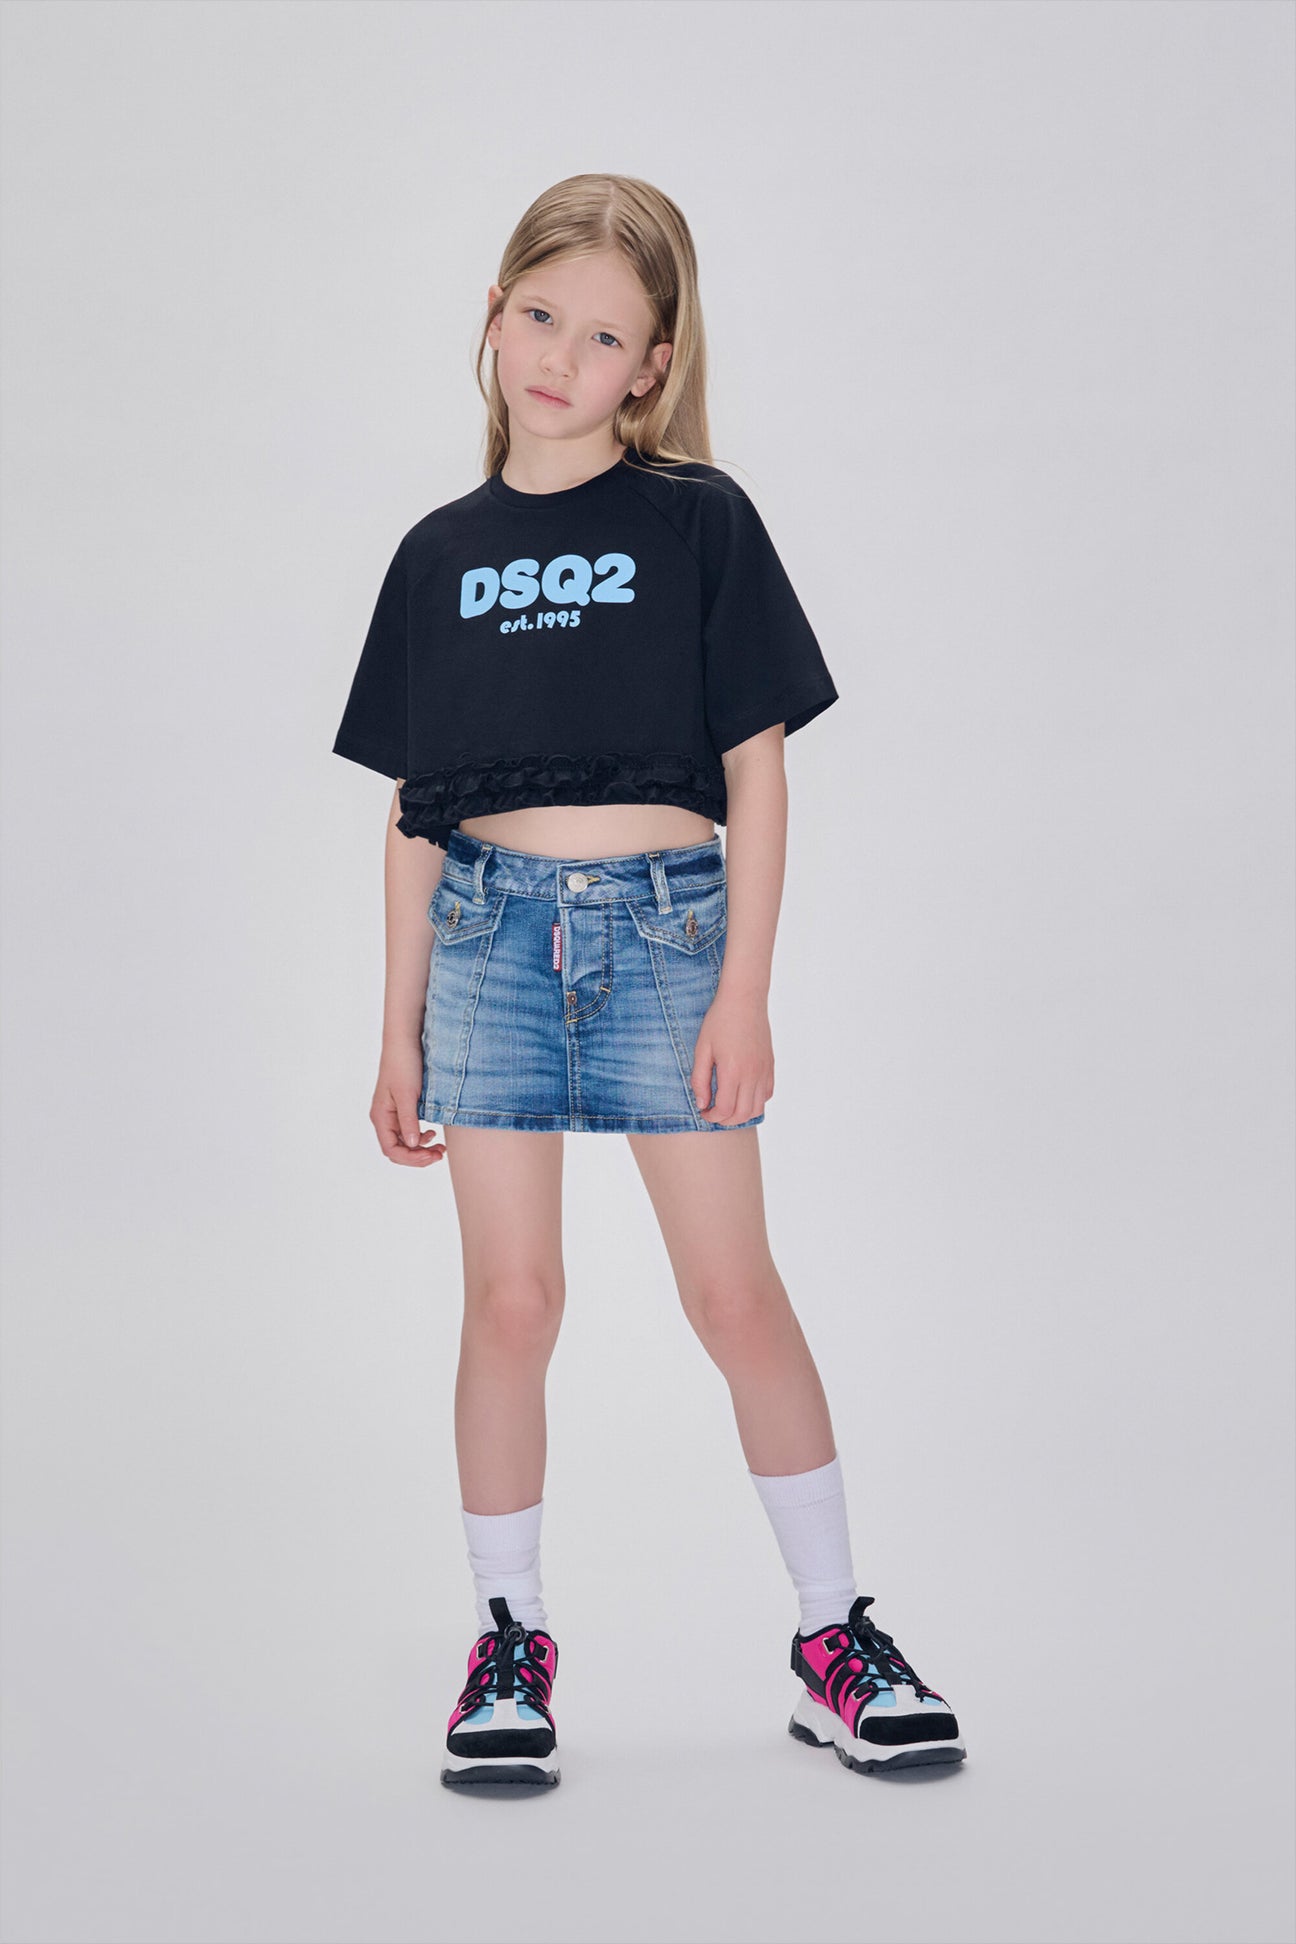 T-shirt with logo DSQ2 est.1995 and ruffles 